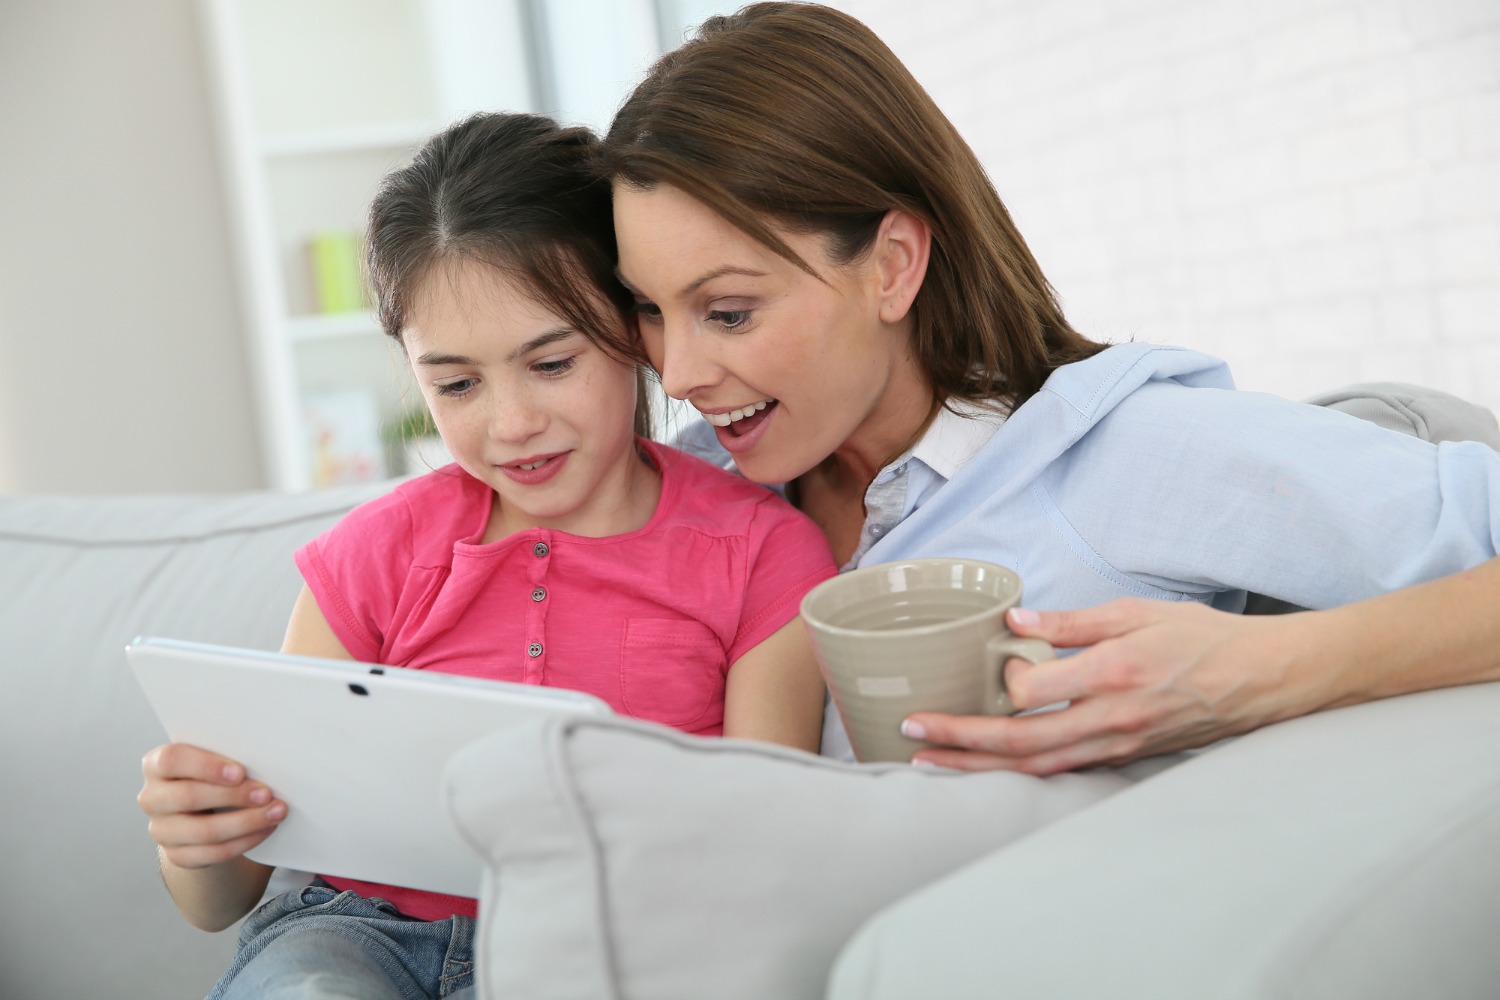 Parenting in the Digital Age: Why You Have Nothing to Fear